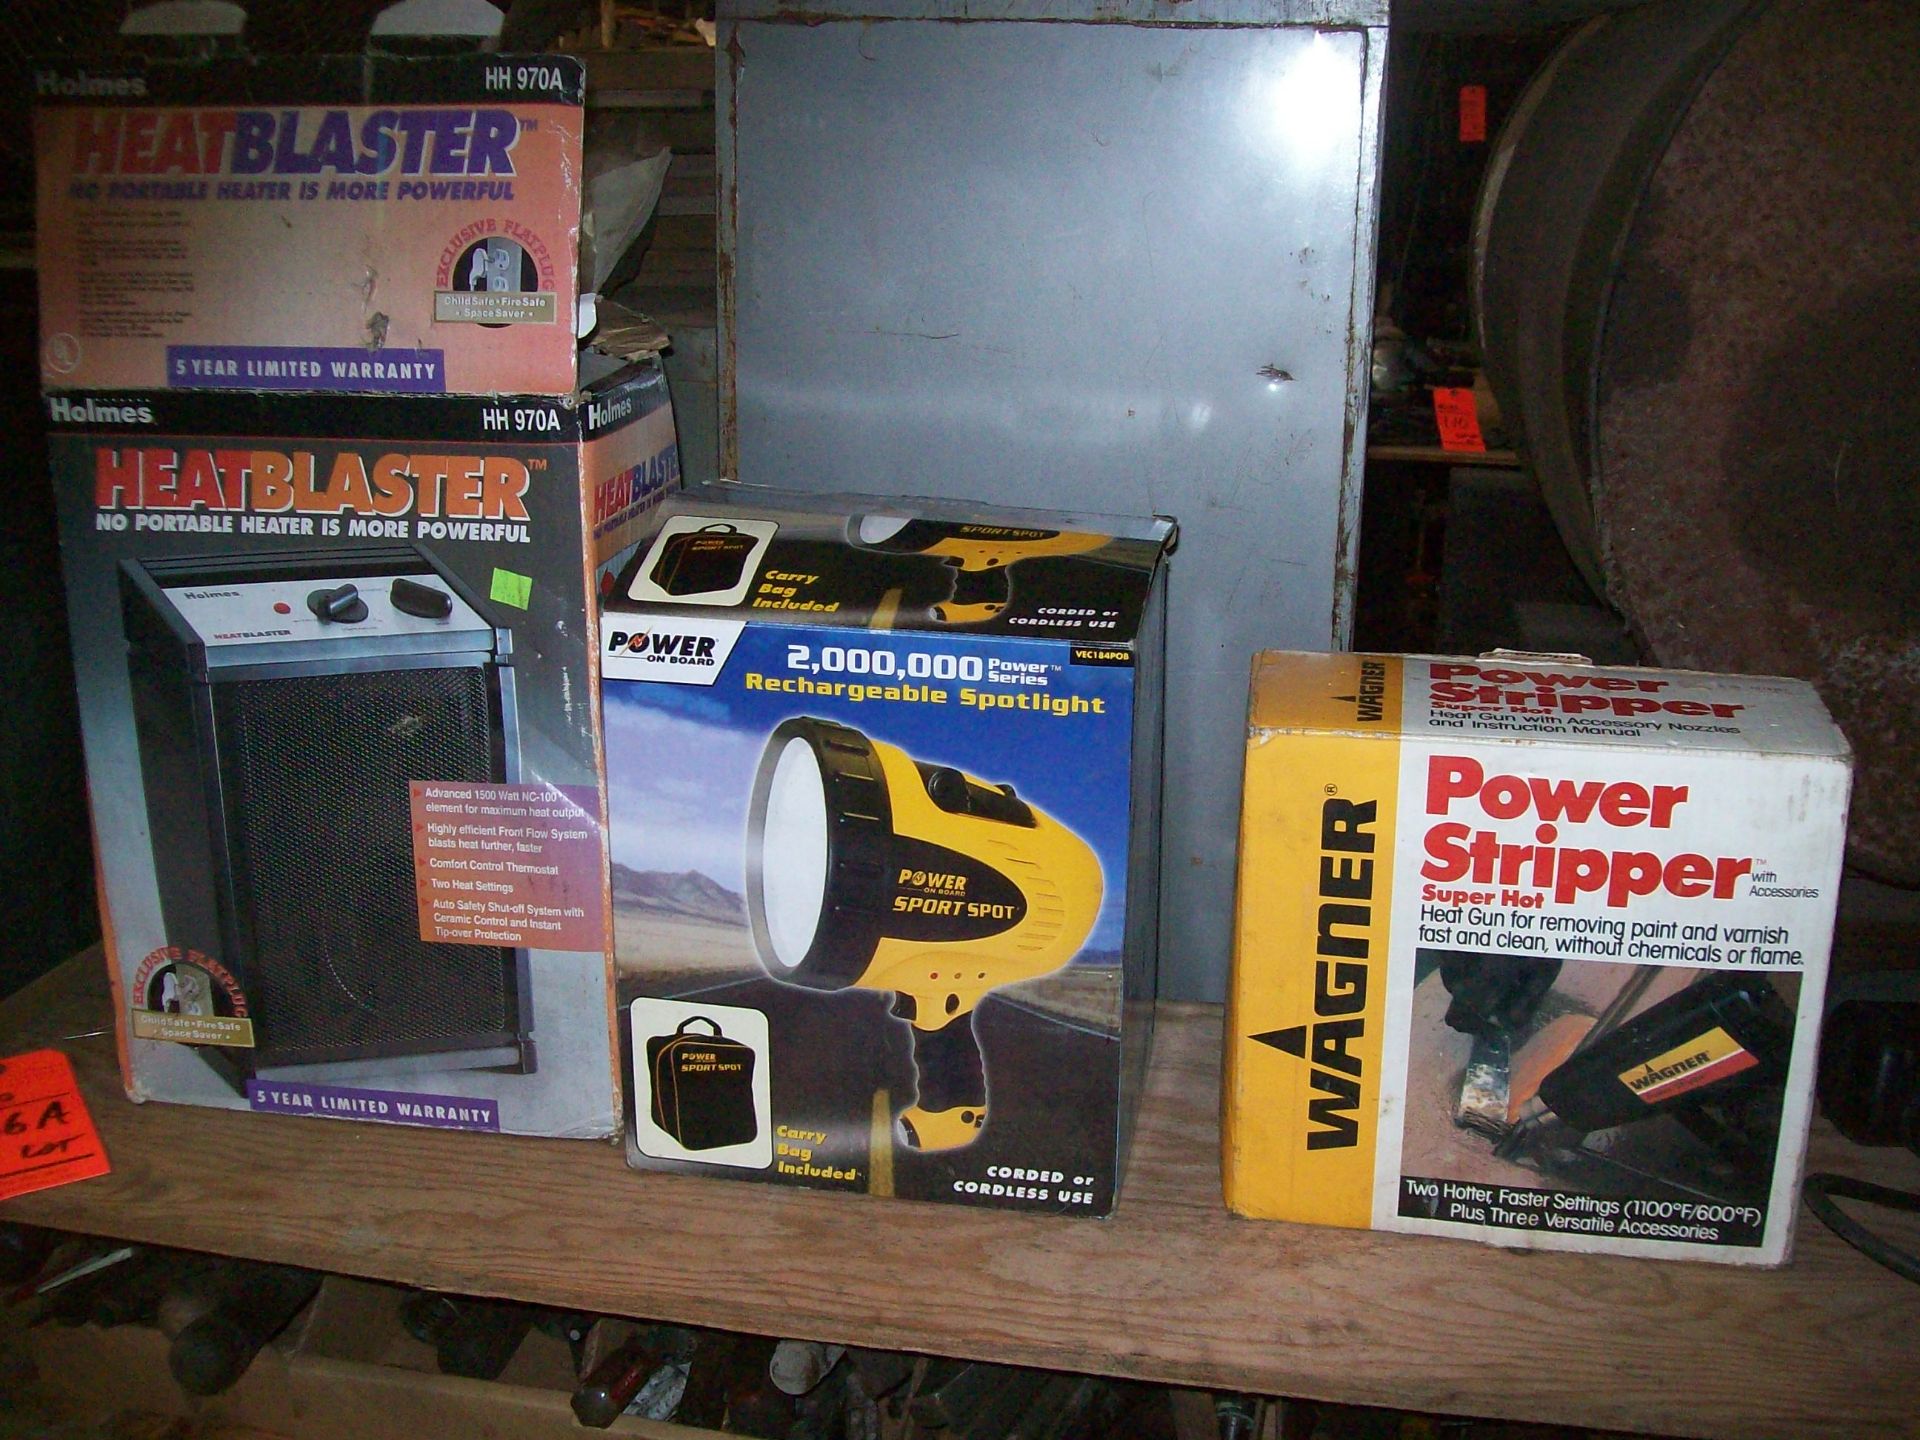 Lot ass't electric tools includes (1) Holmes heat blaster space heater, rechargeable spotlight, (